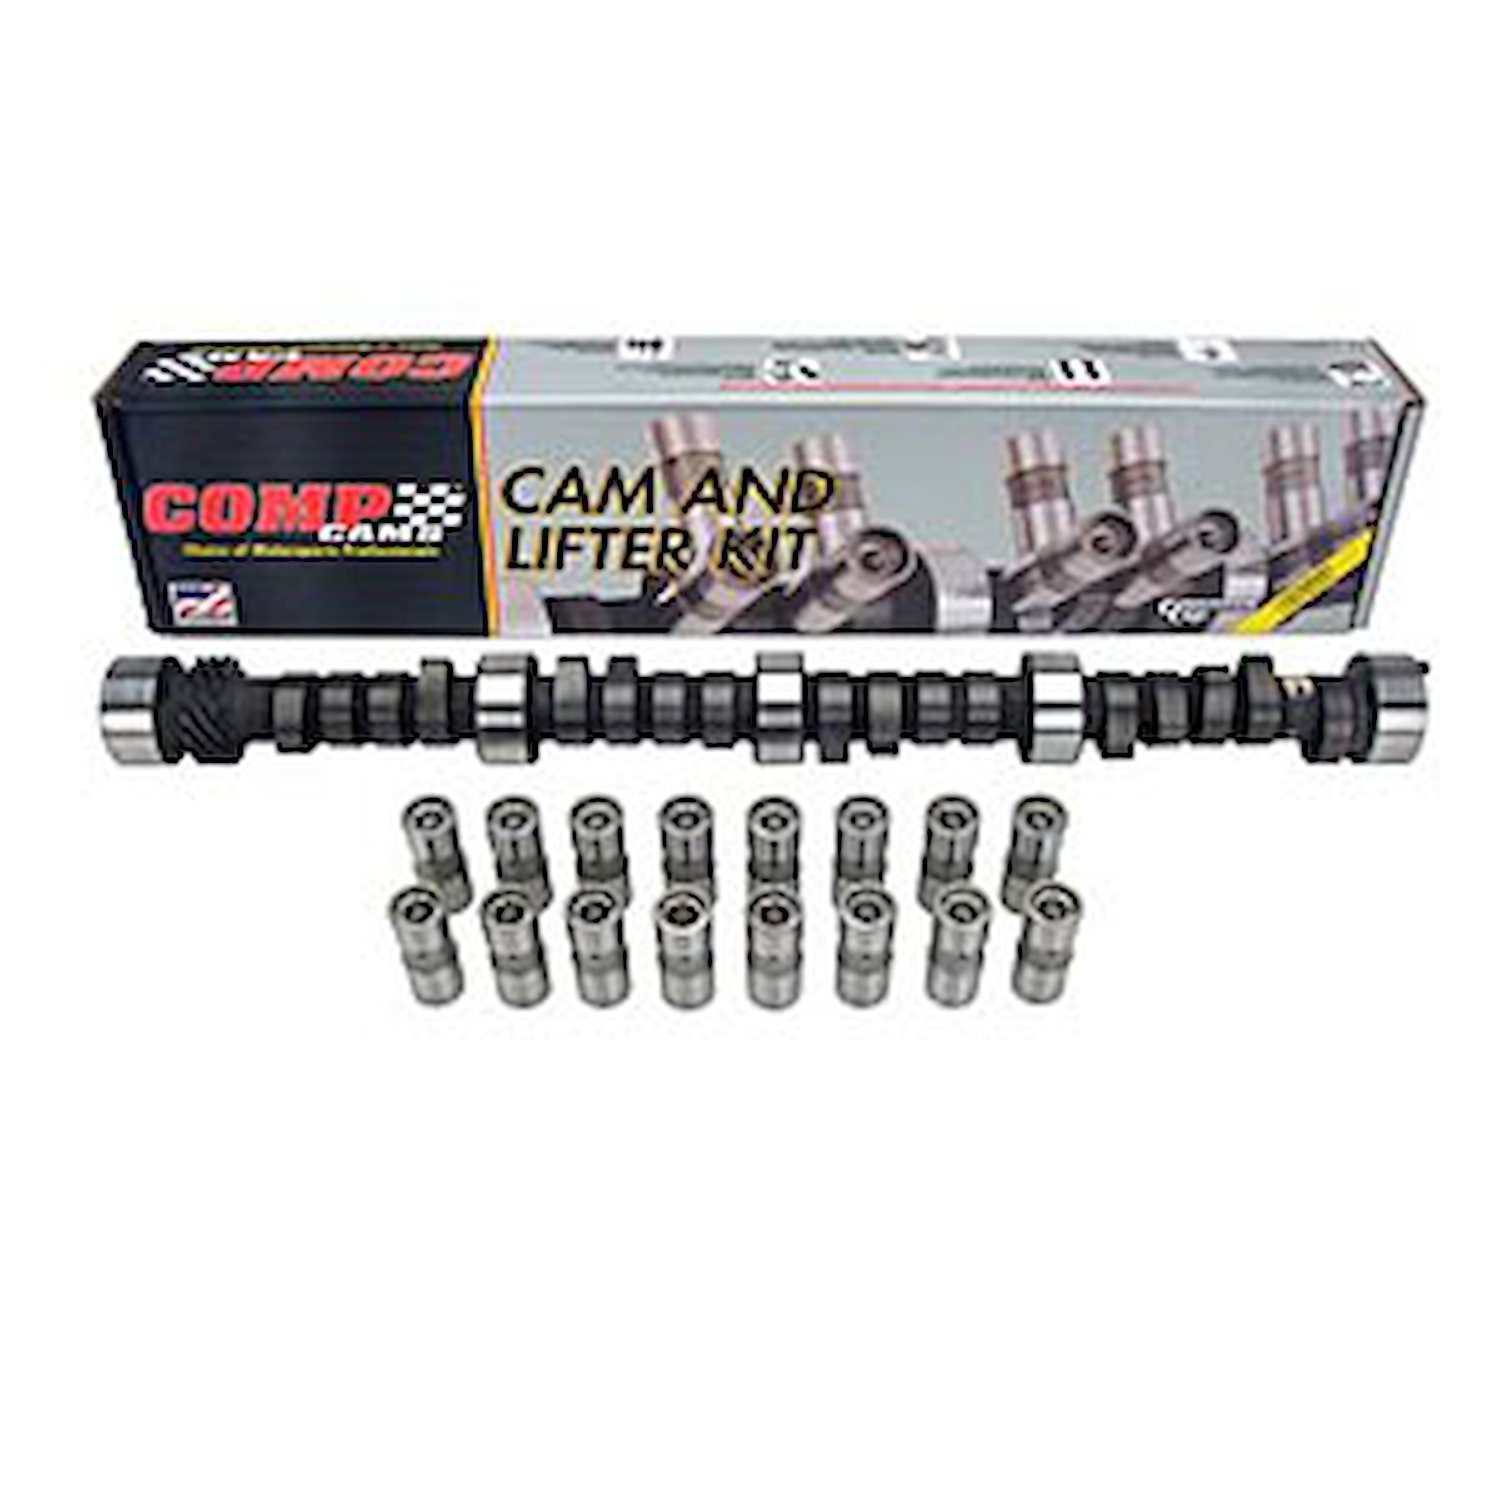 CL12-602-4 Big Mutha' Thumpr Hydraulic Flat Tappet Cam and Lifter Kit for Chevy Small Block Engines [Duration 243/257 @ .050]